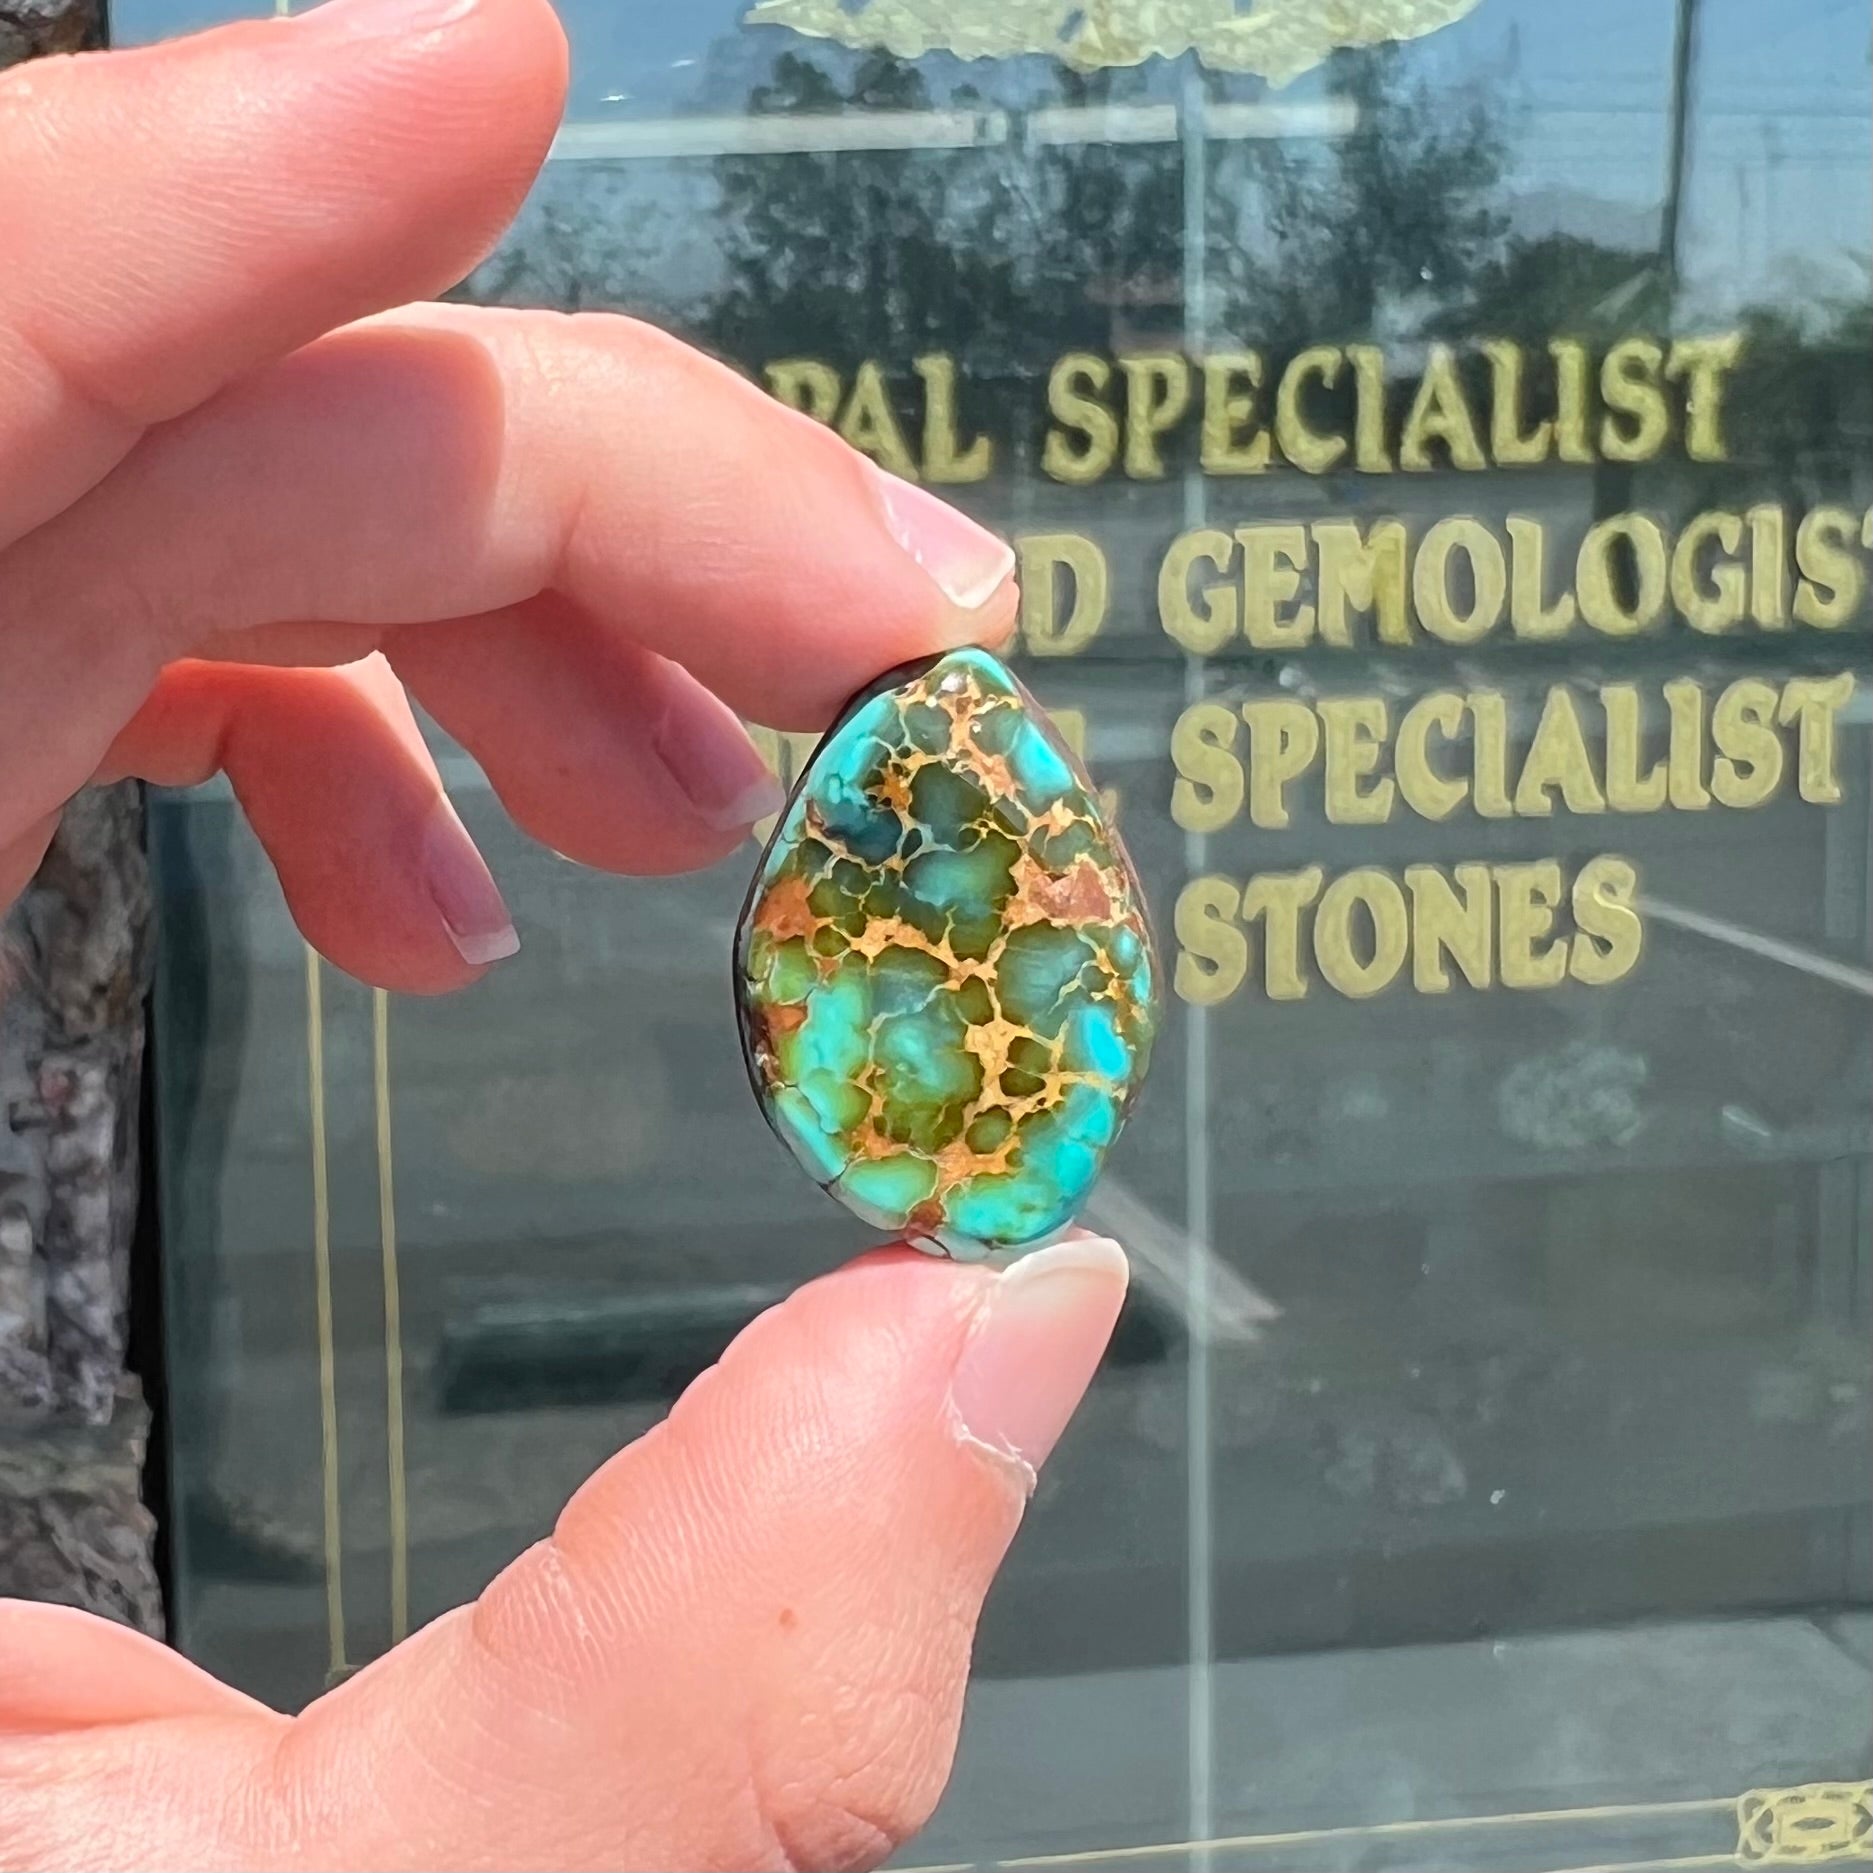 A polished golden spiderweb turquoise cabochon from Manassa, Colorado.